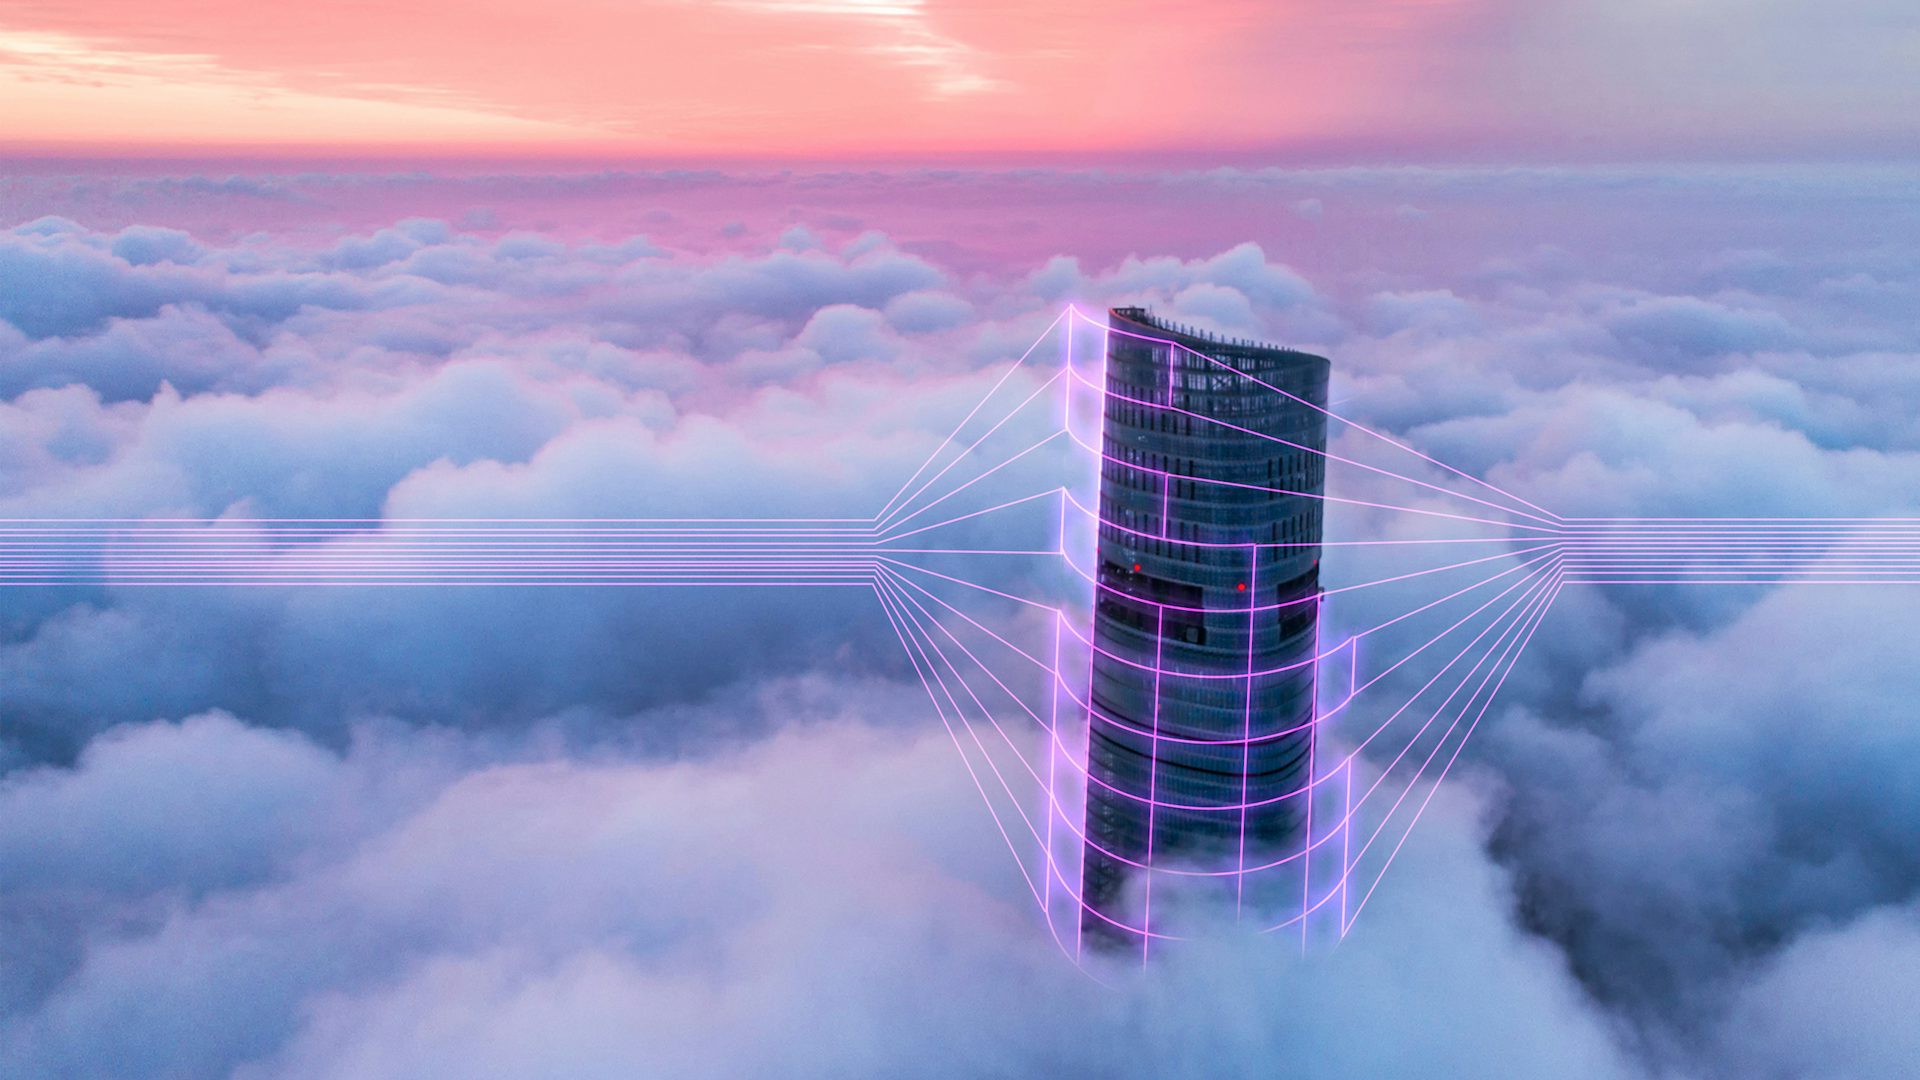 A digital tower surrounded by clouds.